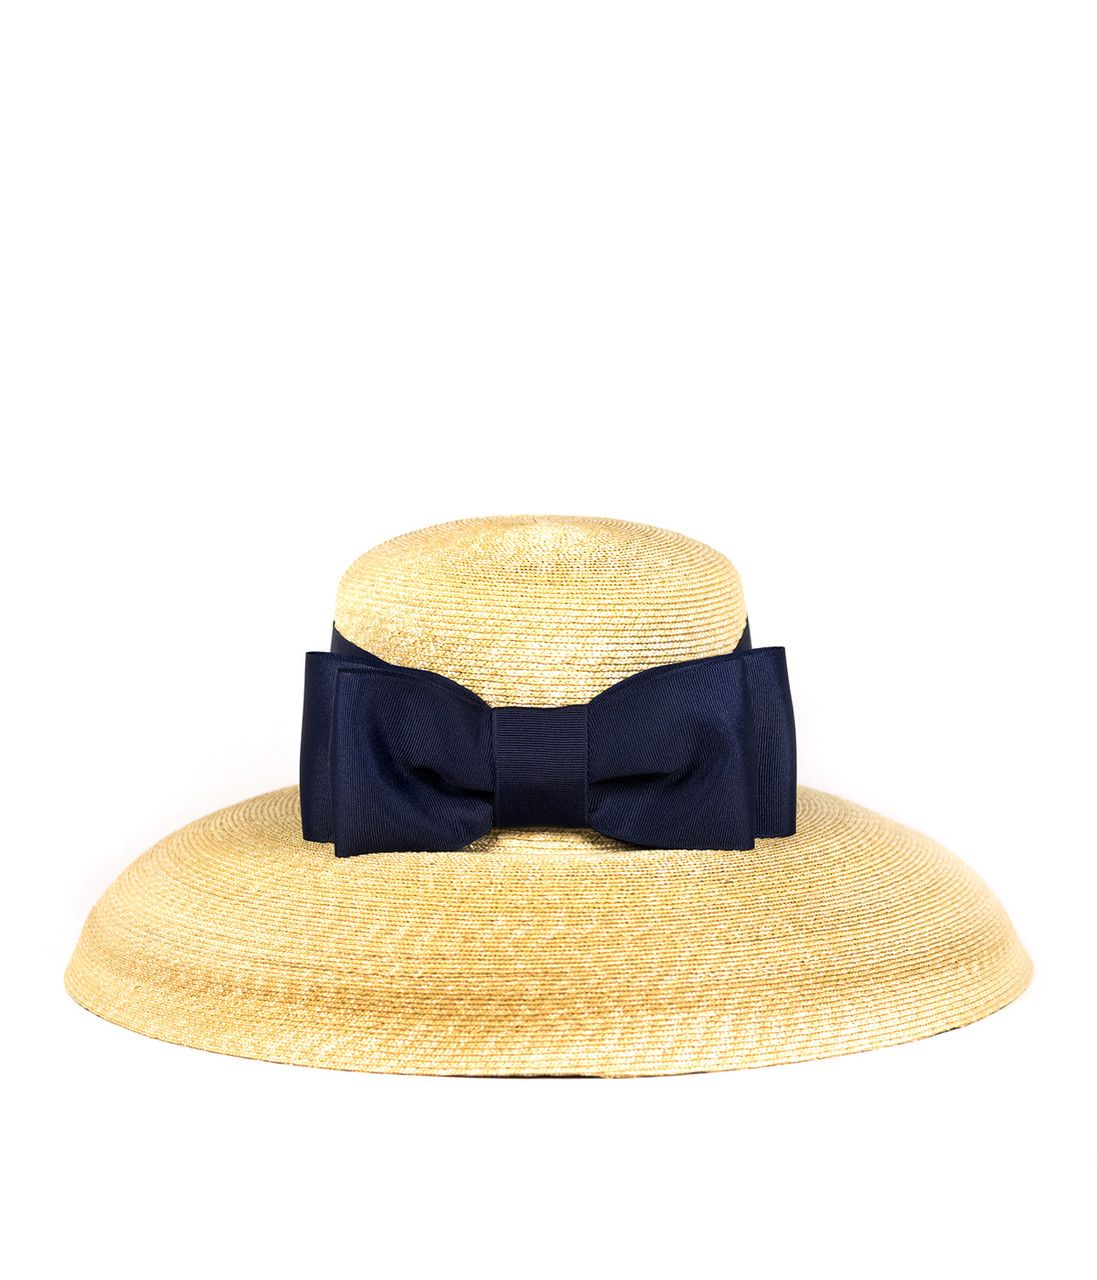 Lauren Hat - Flat Bow - Belle of the Ball Collection | Lisi Lerch Inc